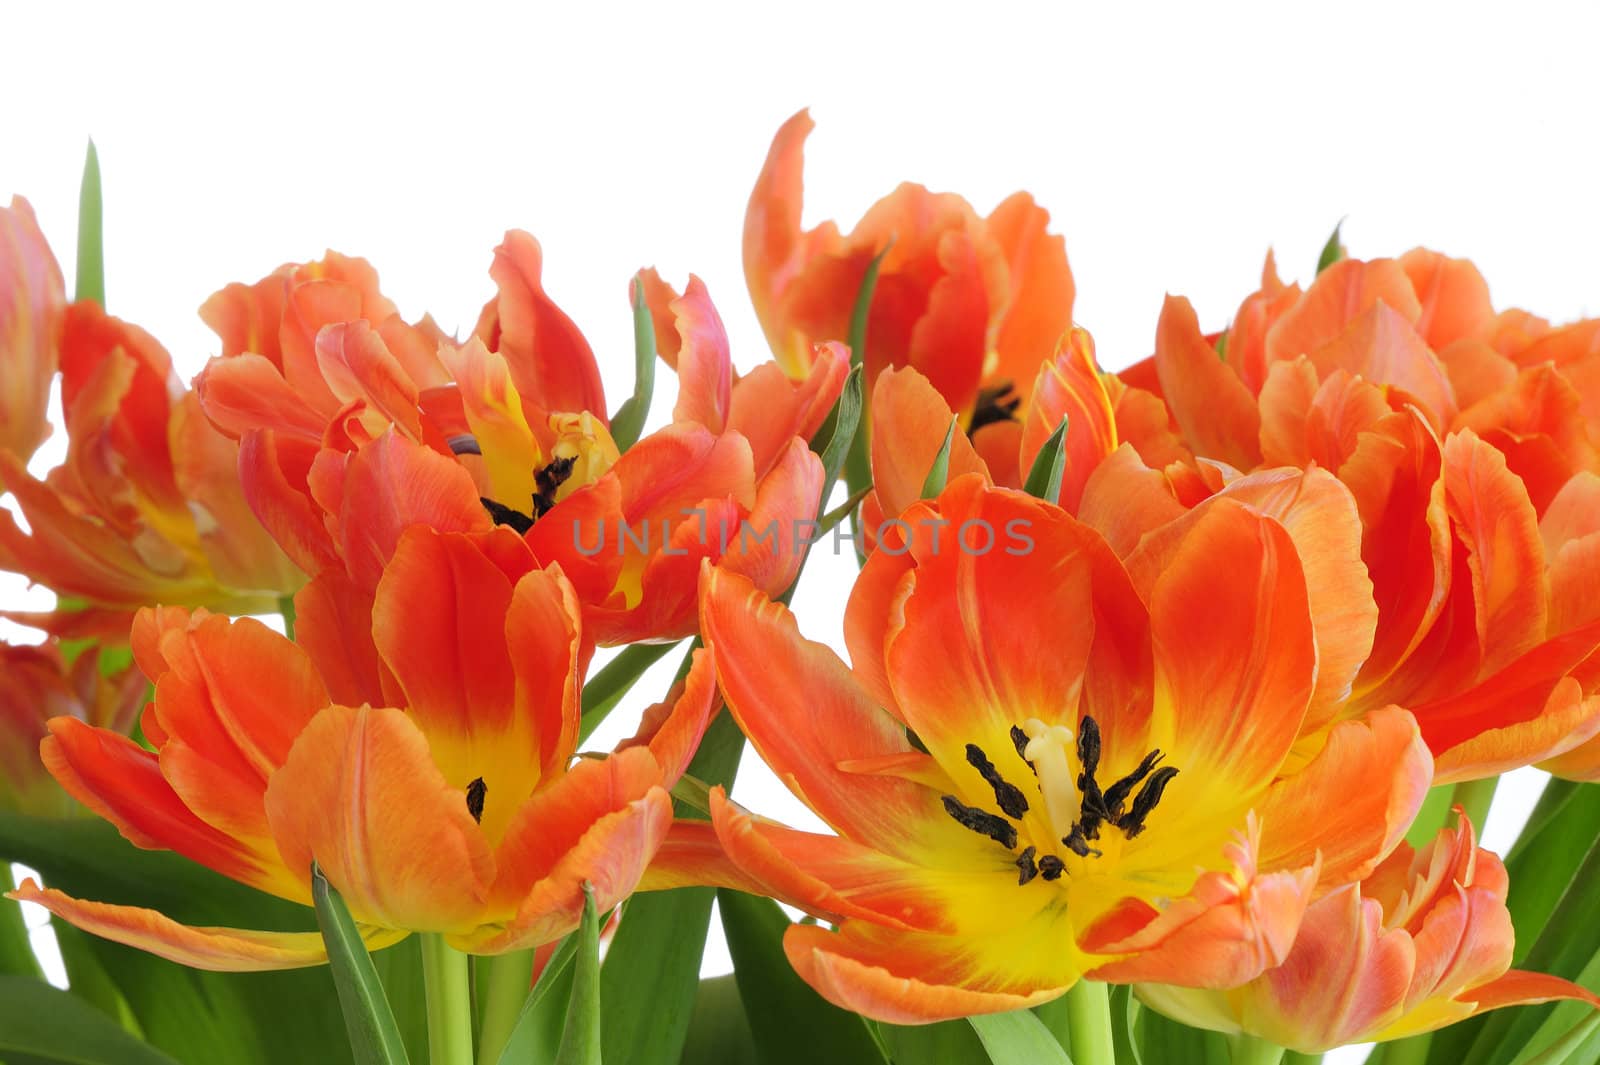 Tulips against a white background
